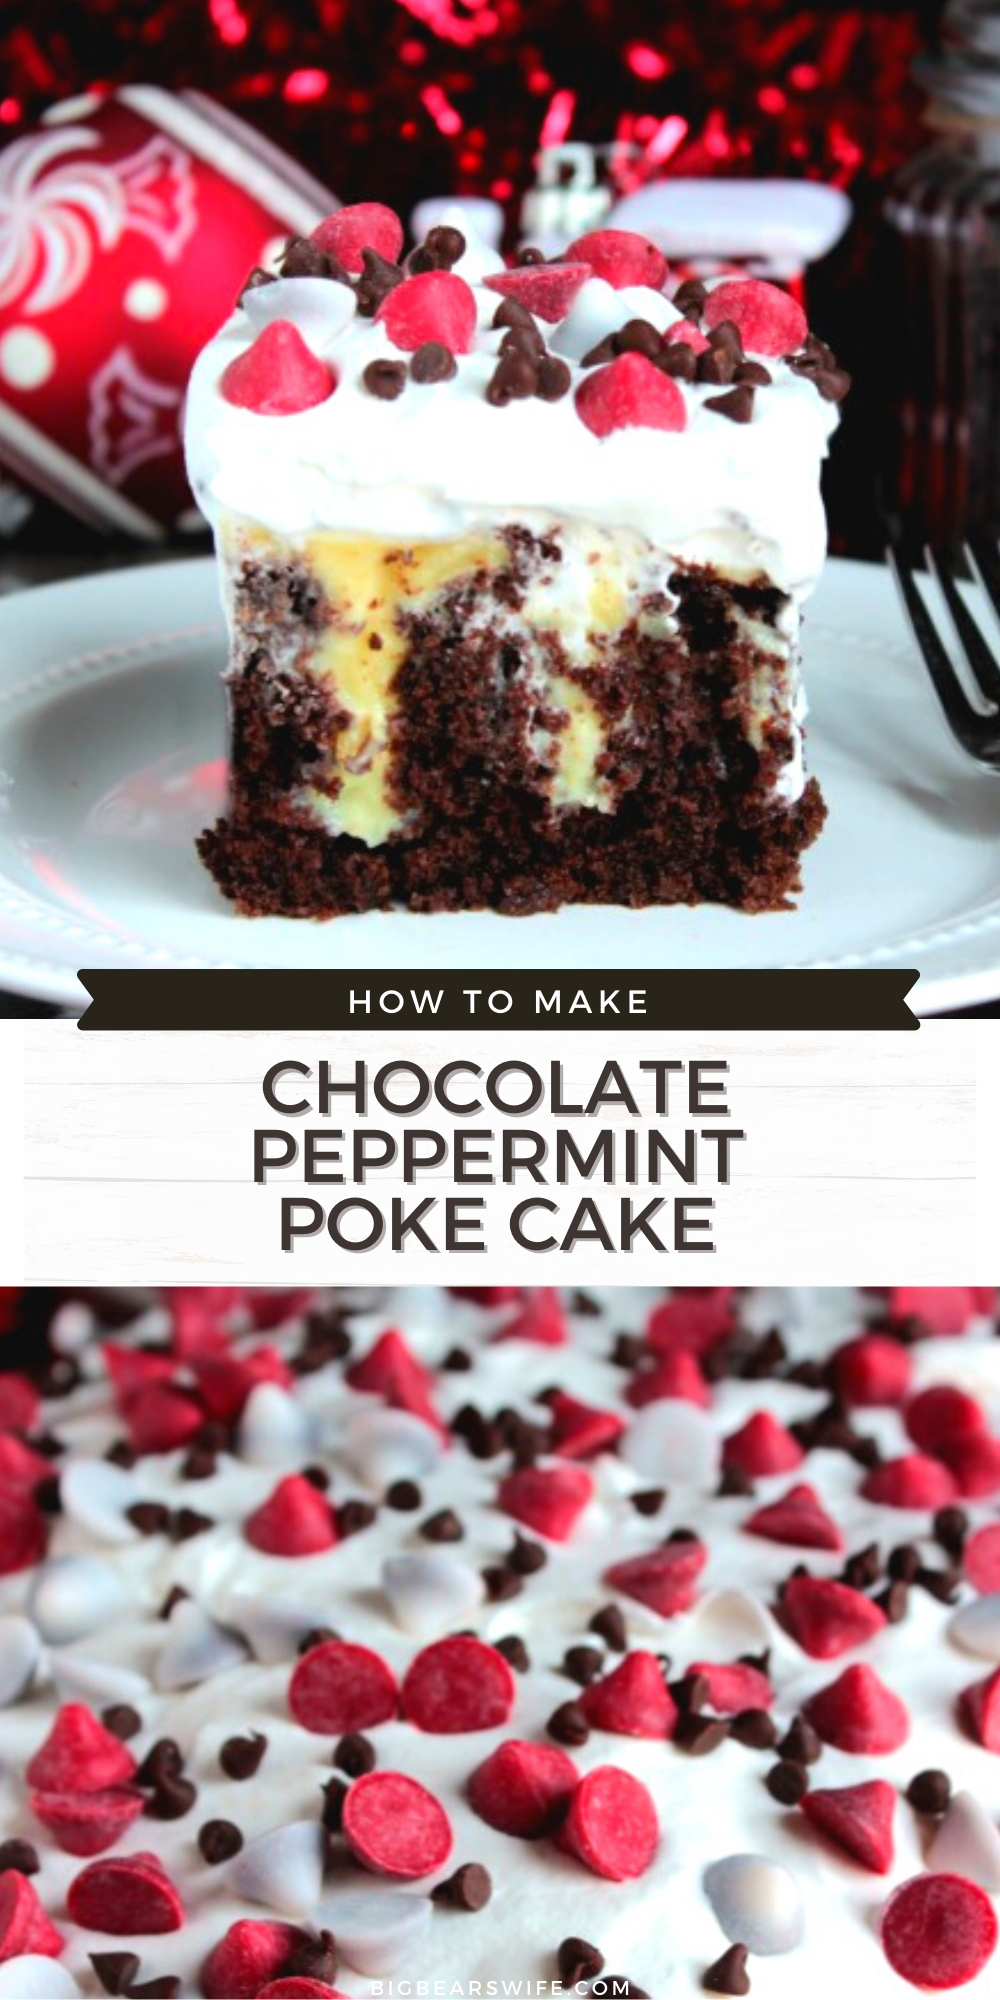 Chocolate Peppermint Poke Cake is filled with everything you love about the holidays but it's also easy enough to make without any fuss! via @bigbearswife